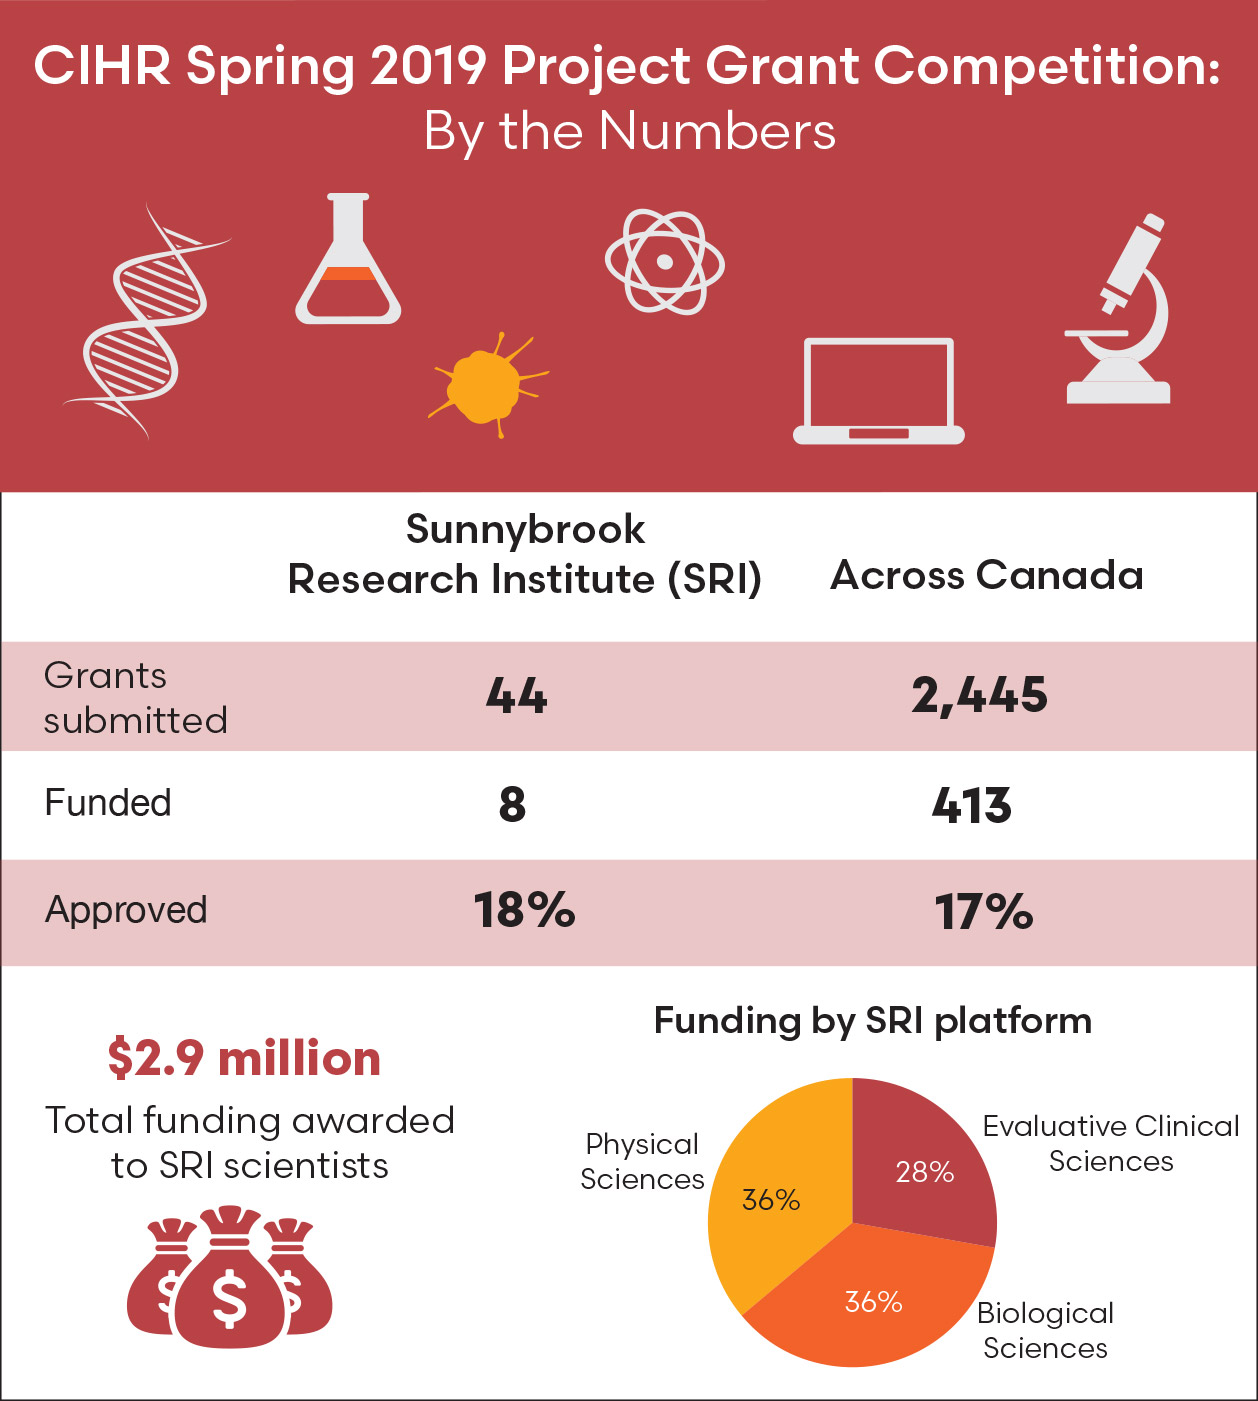 CIHR Spring 2019 Project Grant Competition - By the Number